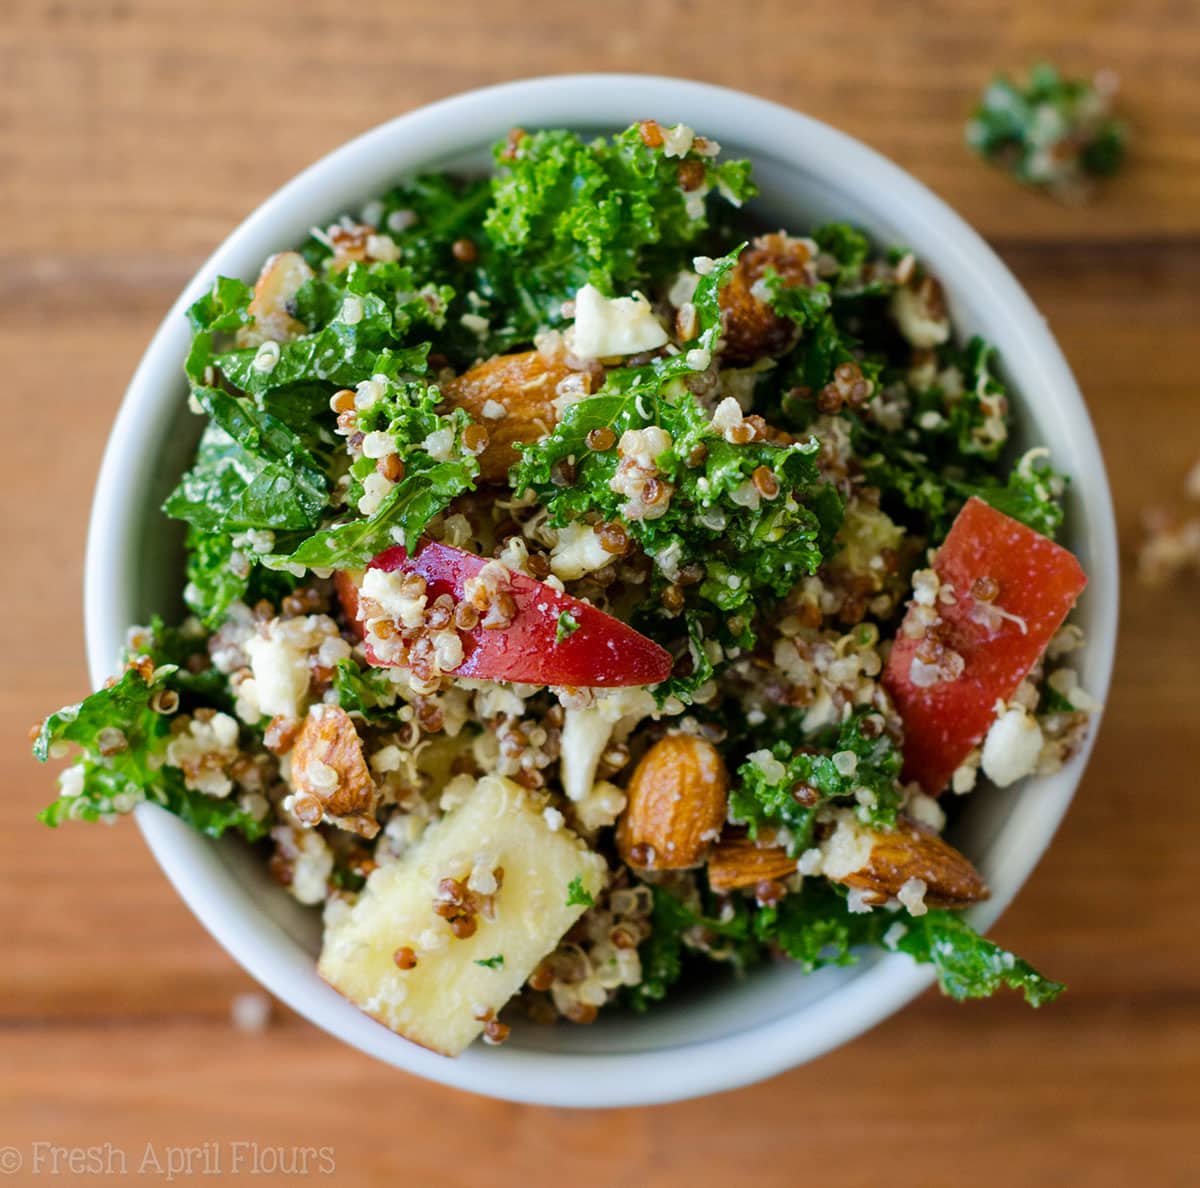 Apple, Quinoa, and Almond Kale Salad: An easy, no bake side dish packed with flavor, fiber, and protein.